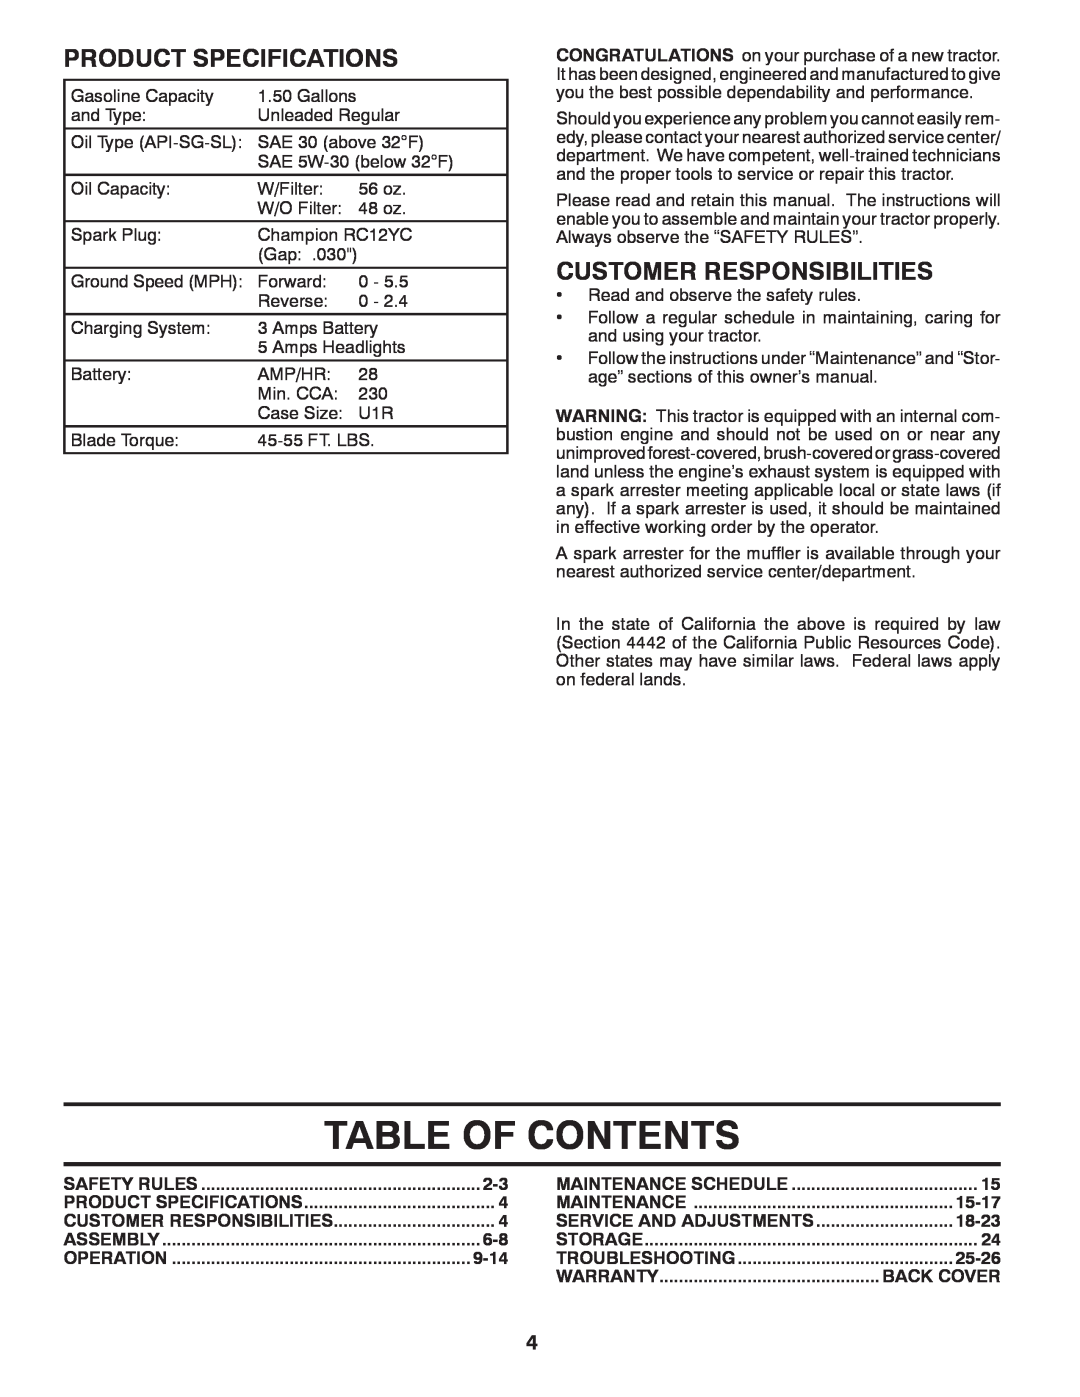 Poulan 96042007201, 427159 manual Table Of Contents, Product Specifications, Customer Responsibilities 